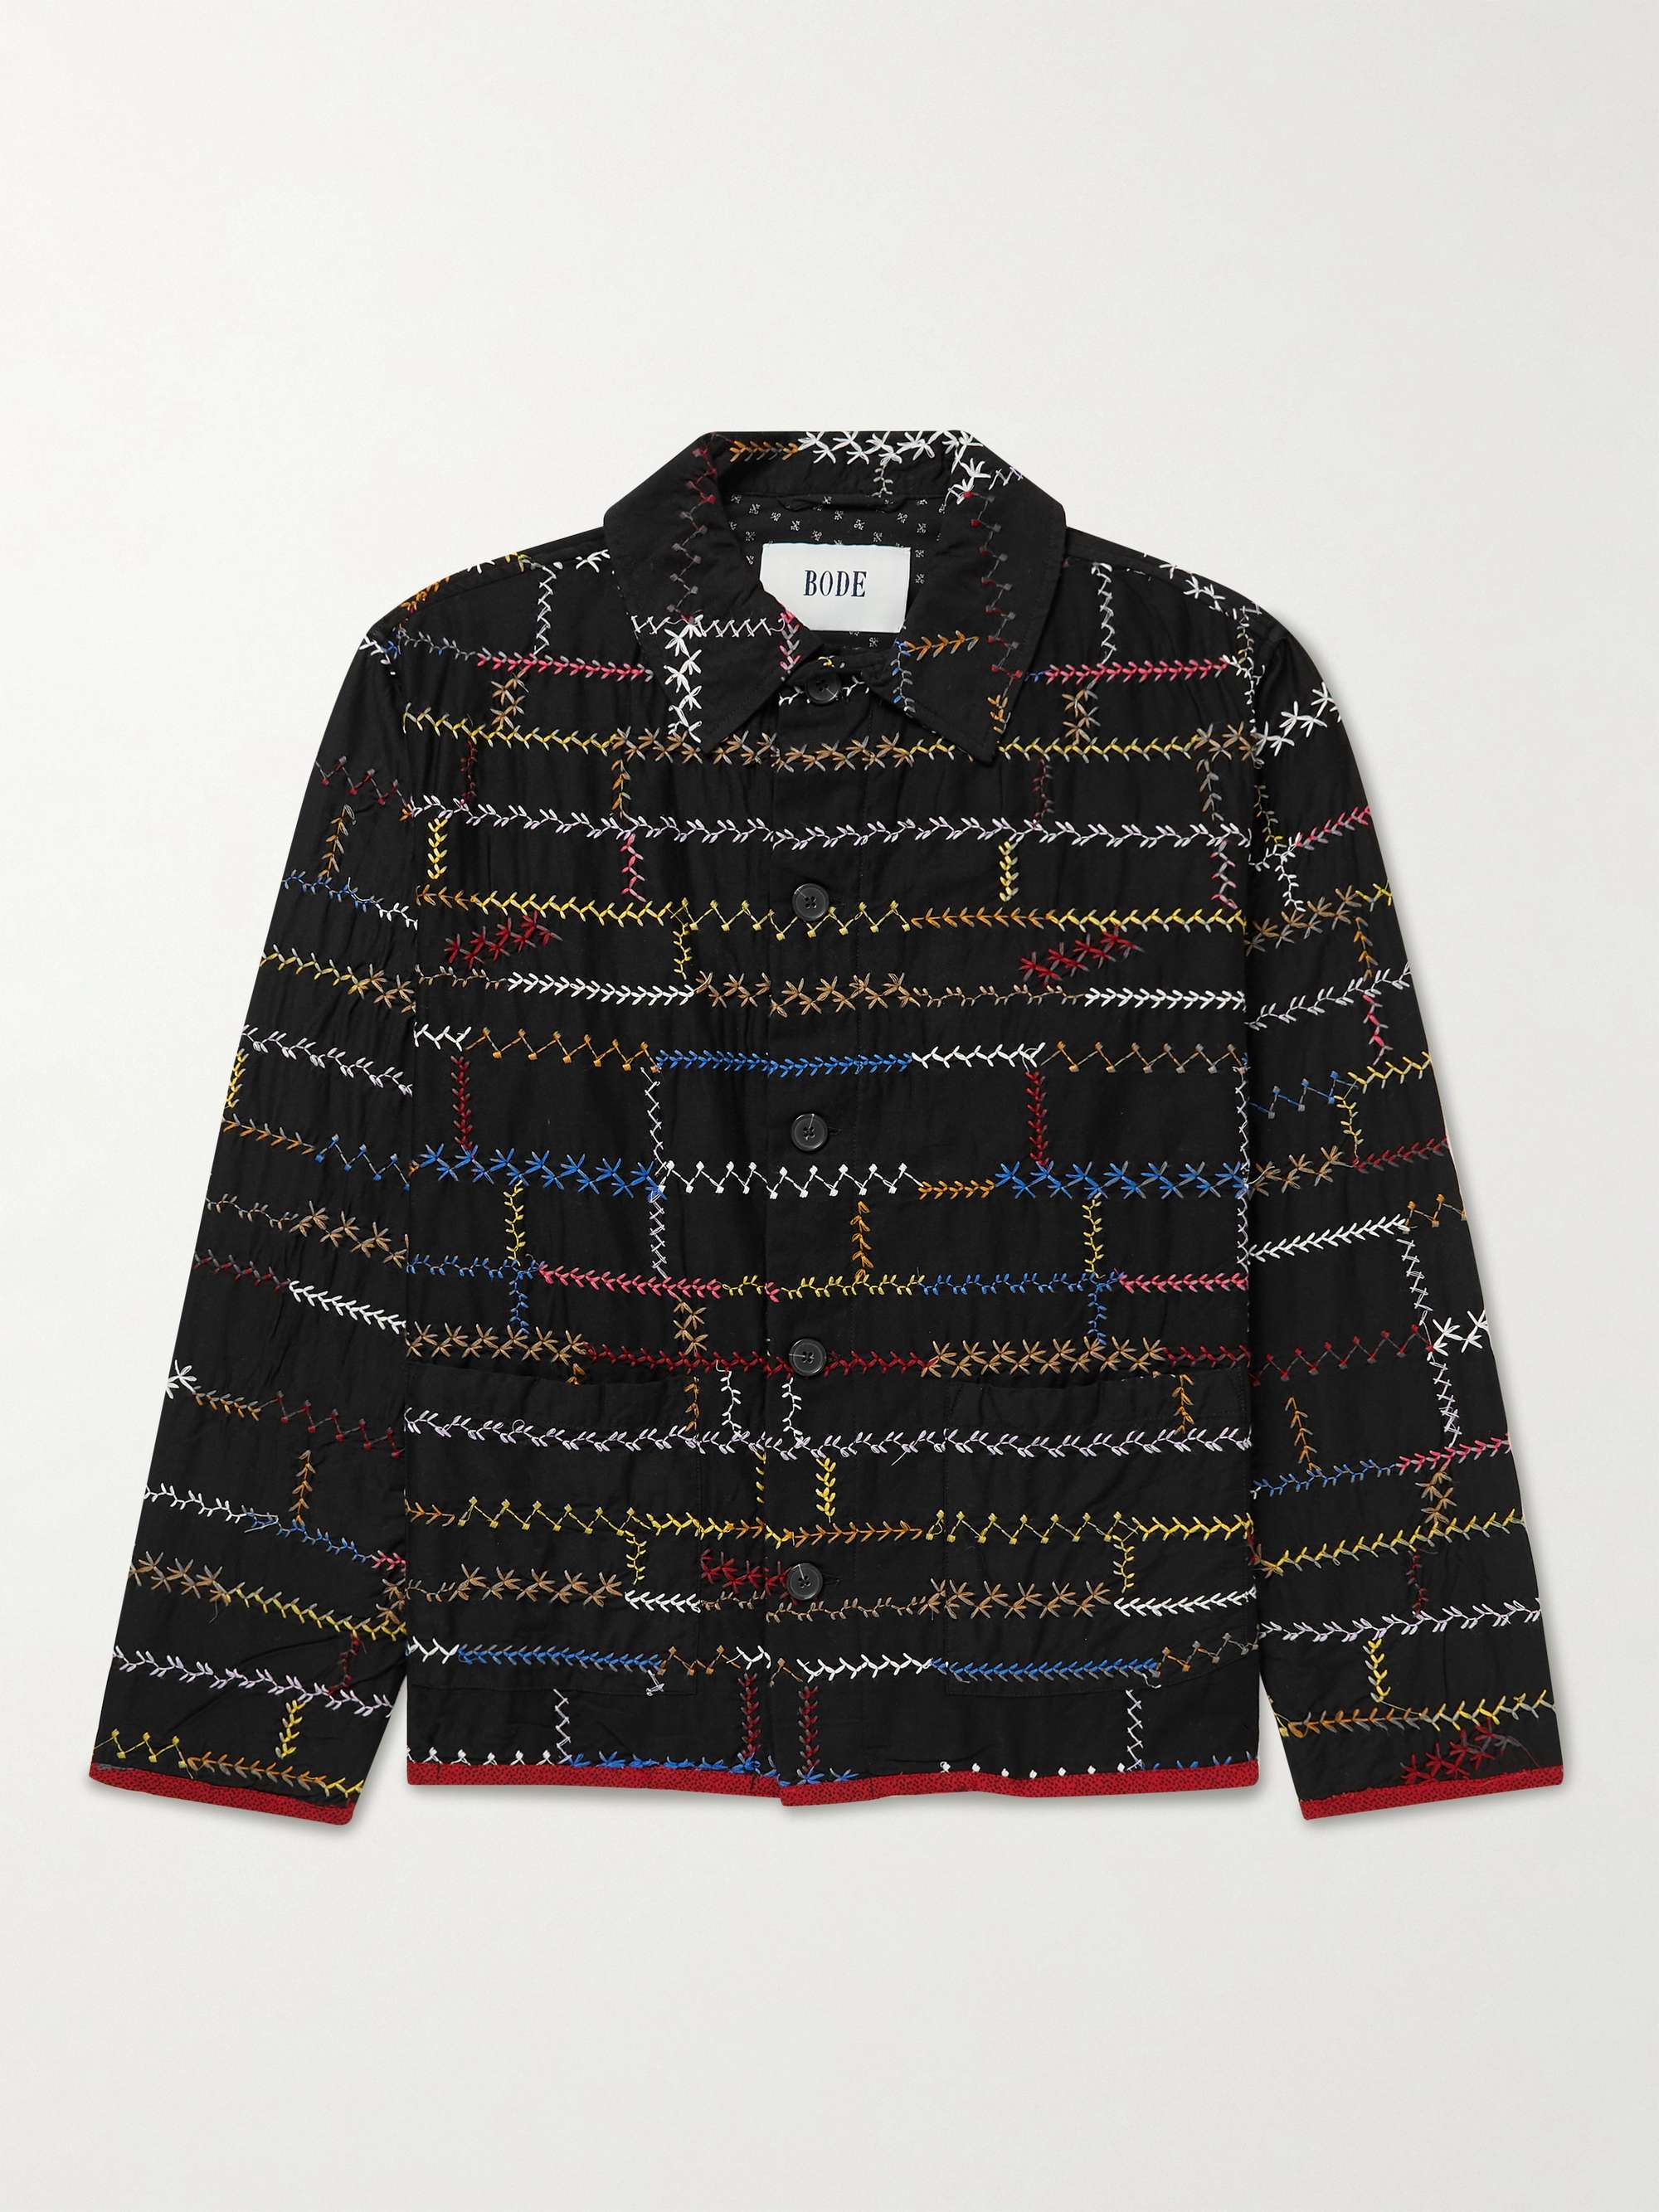 BODE Crazy Quilt Embroidered Cotton Jacket